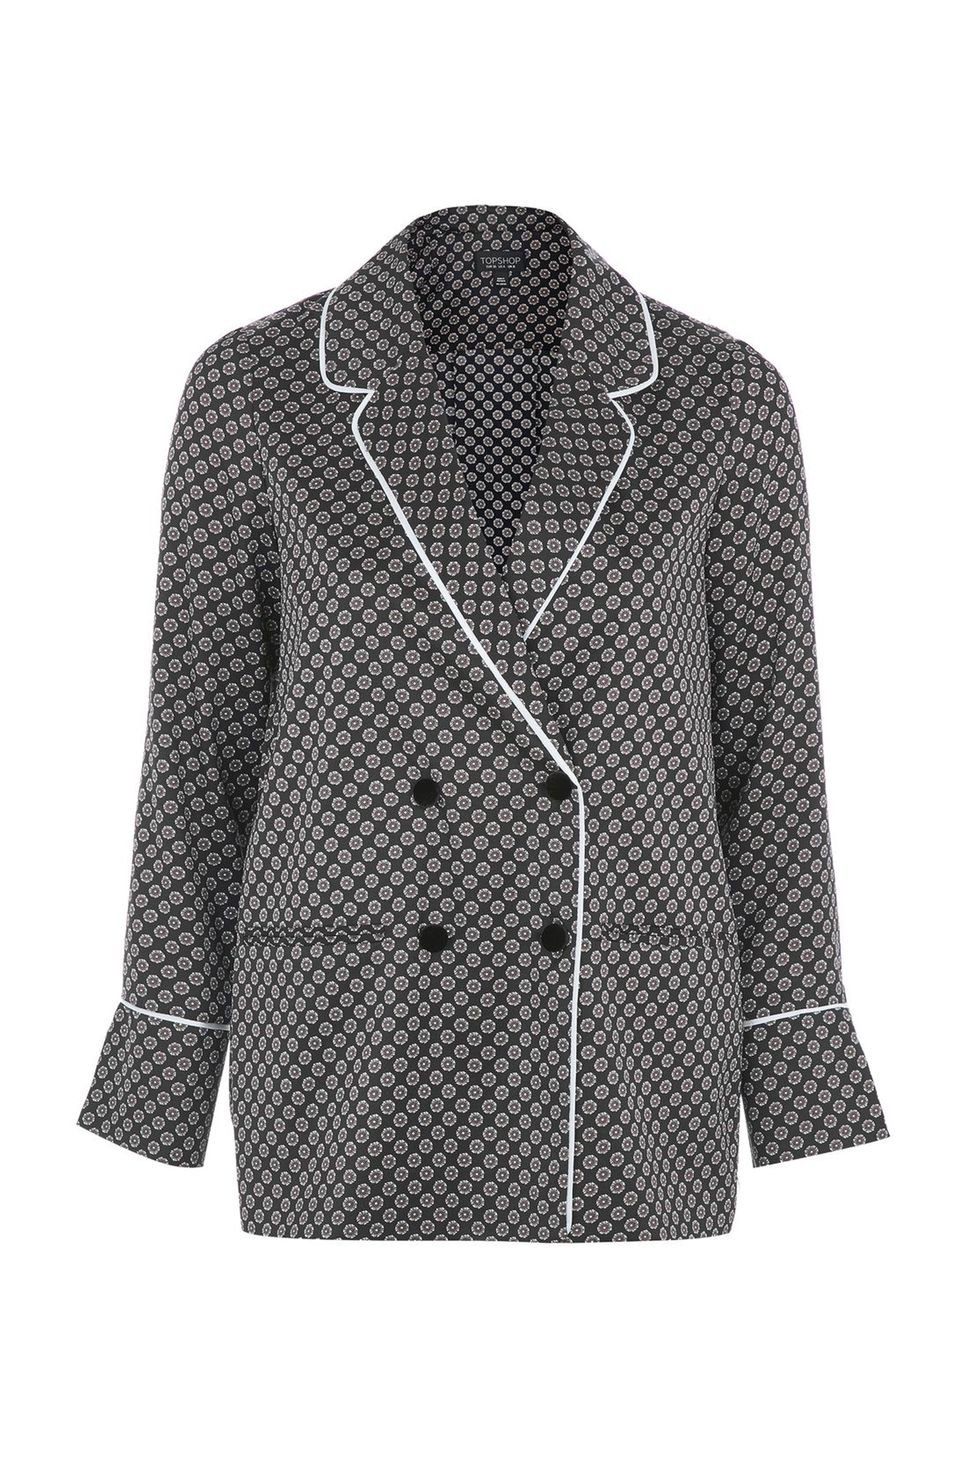 <p>
Topshop Soft Geo Print Jacket, $110; <a href="http://us.topshop.com/en/tsus/product/clothing-70483/jackets-coats-2390895/soft-geo-print-jacket-ww-6147911?bi=80&amp;ps=20">topshop.com</a></p><p><span class="redactor-invisible-space" data-verified="redactor" data-redactor-tag="span" data-redactor-class="redactor-invisible-space"></span></p>